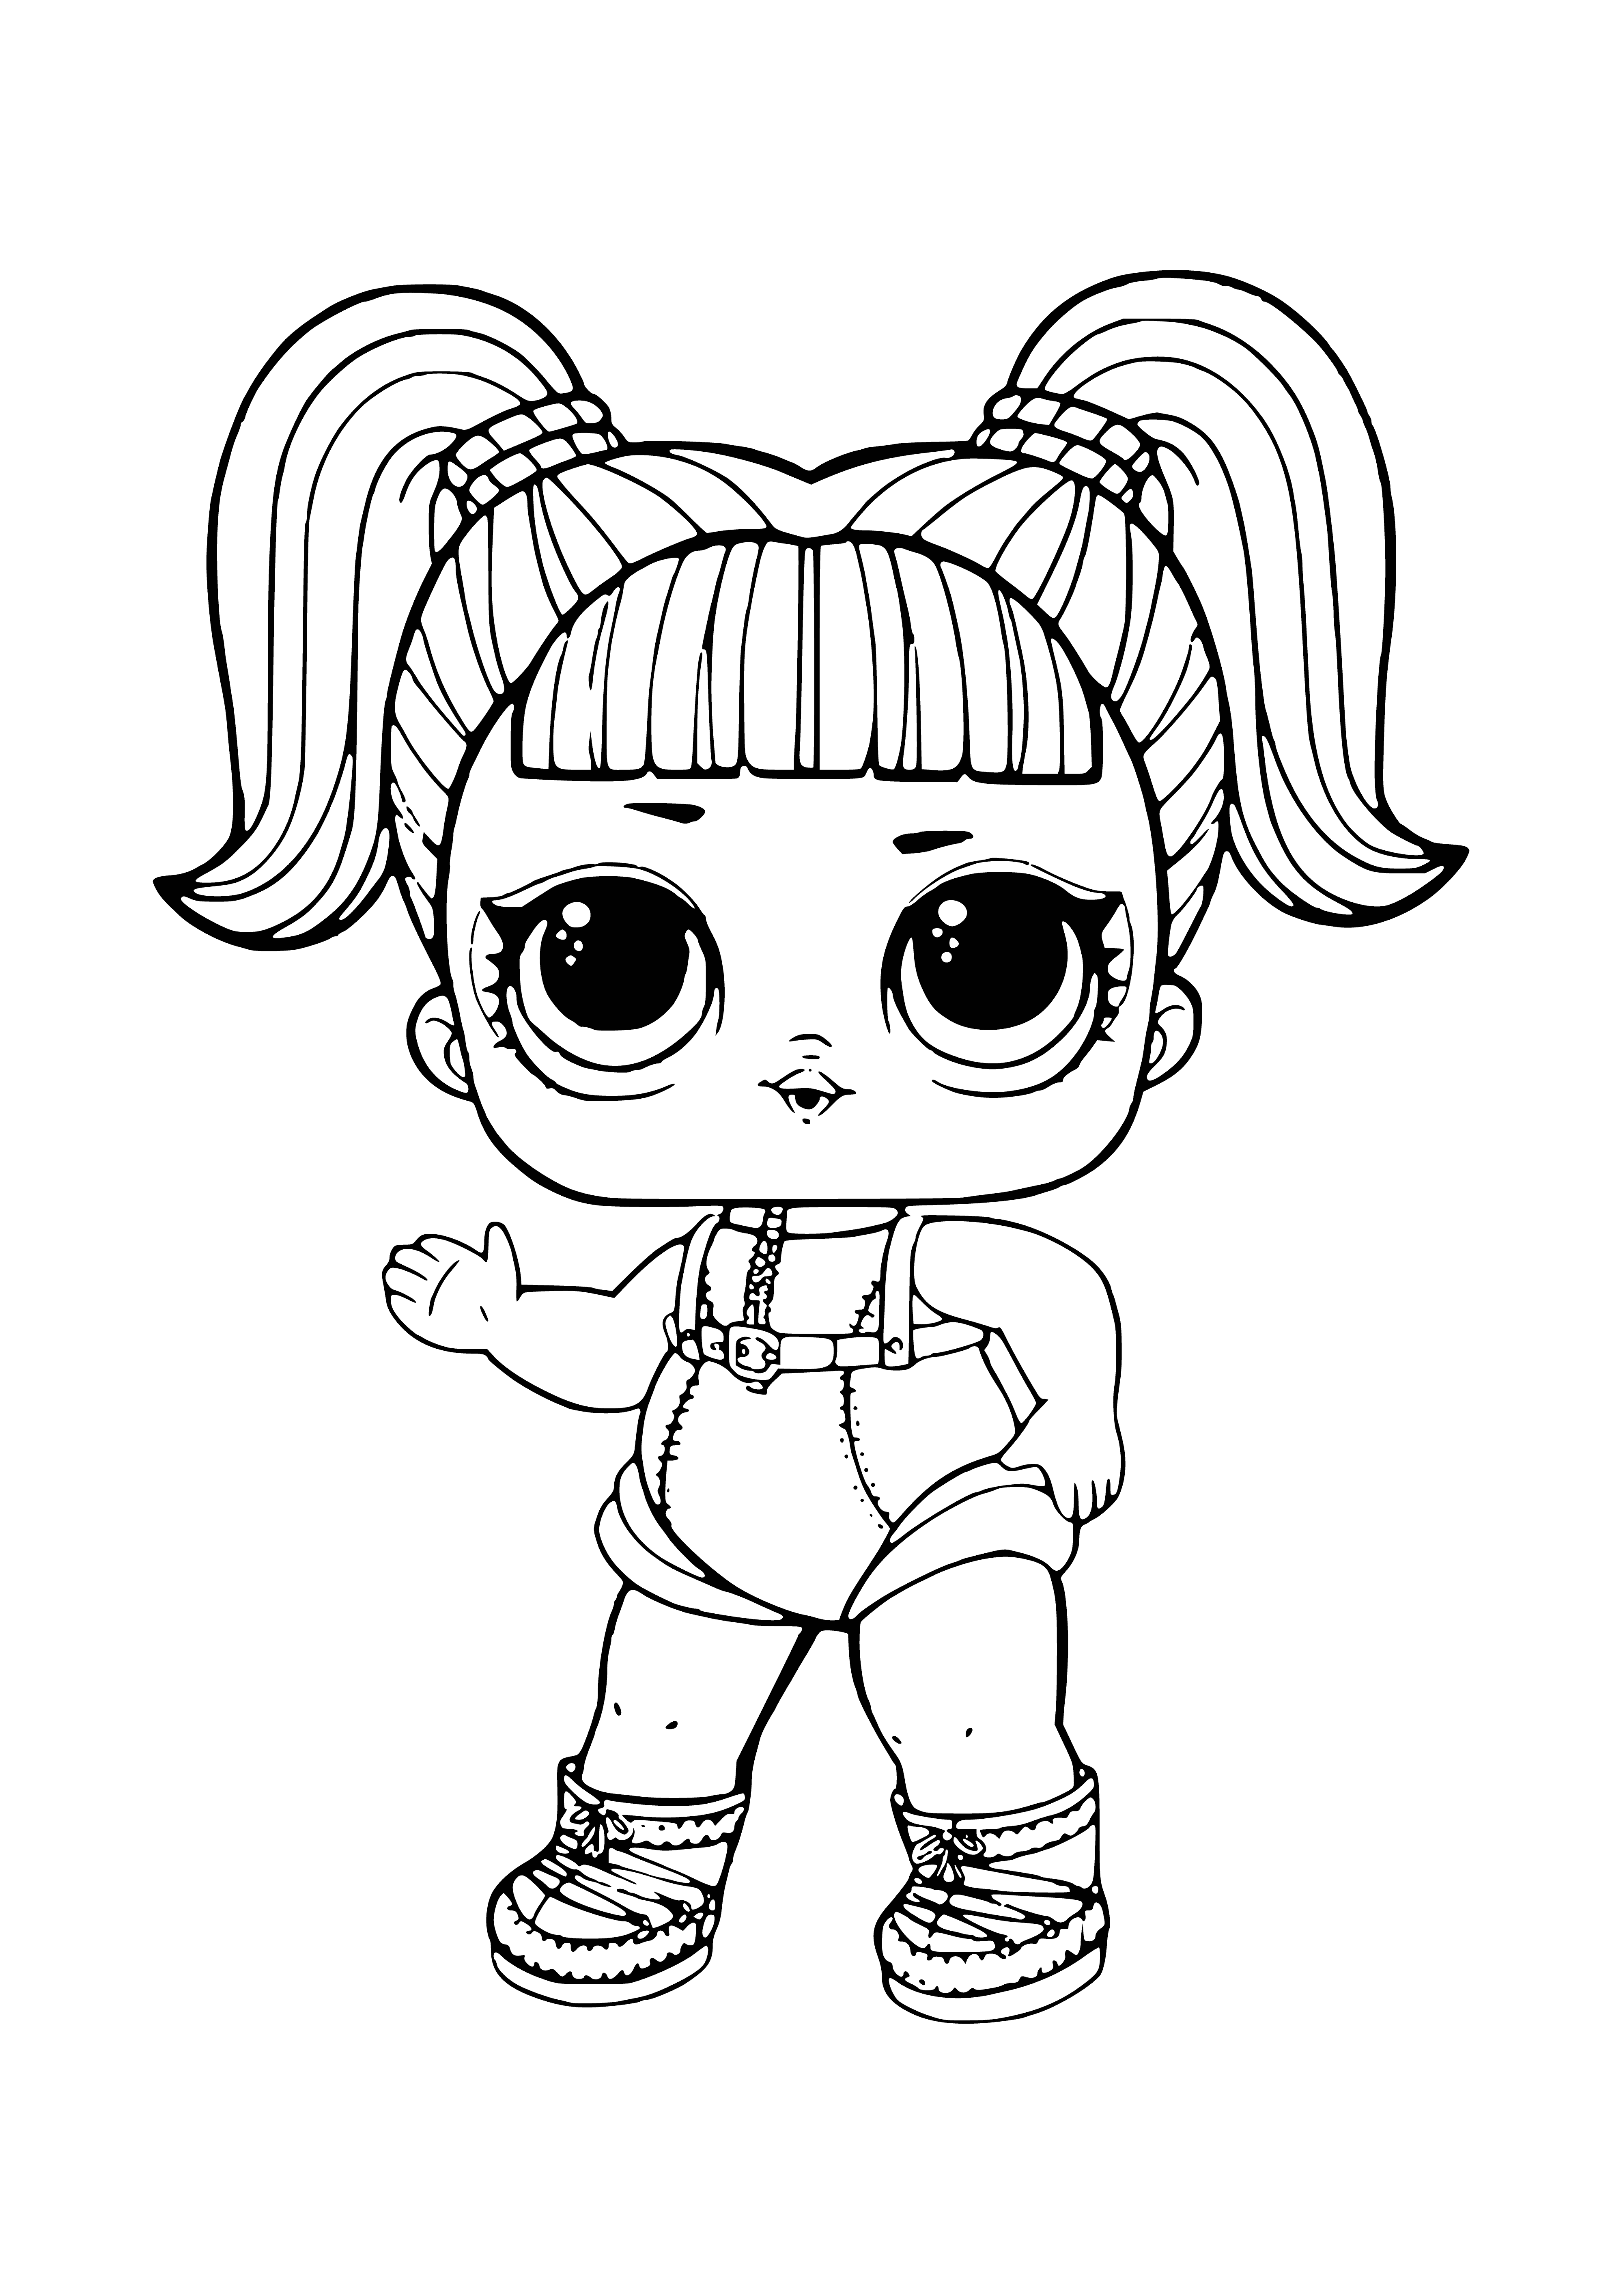 LOL Glamstronaut confetti pop (Glamorous astronaut) coloring page